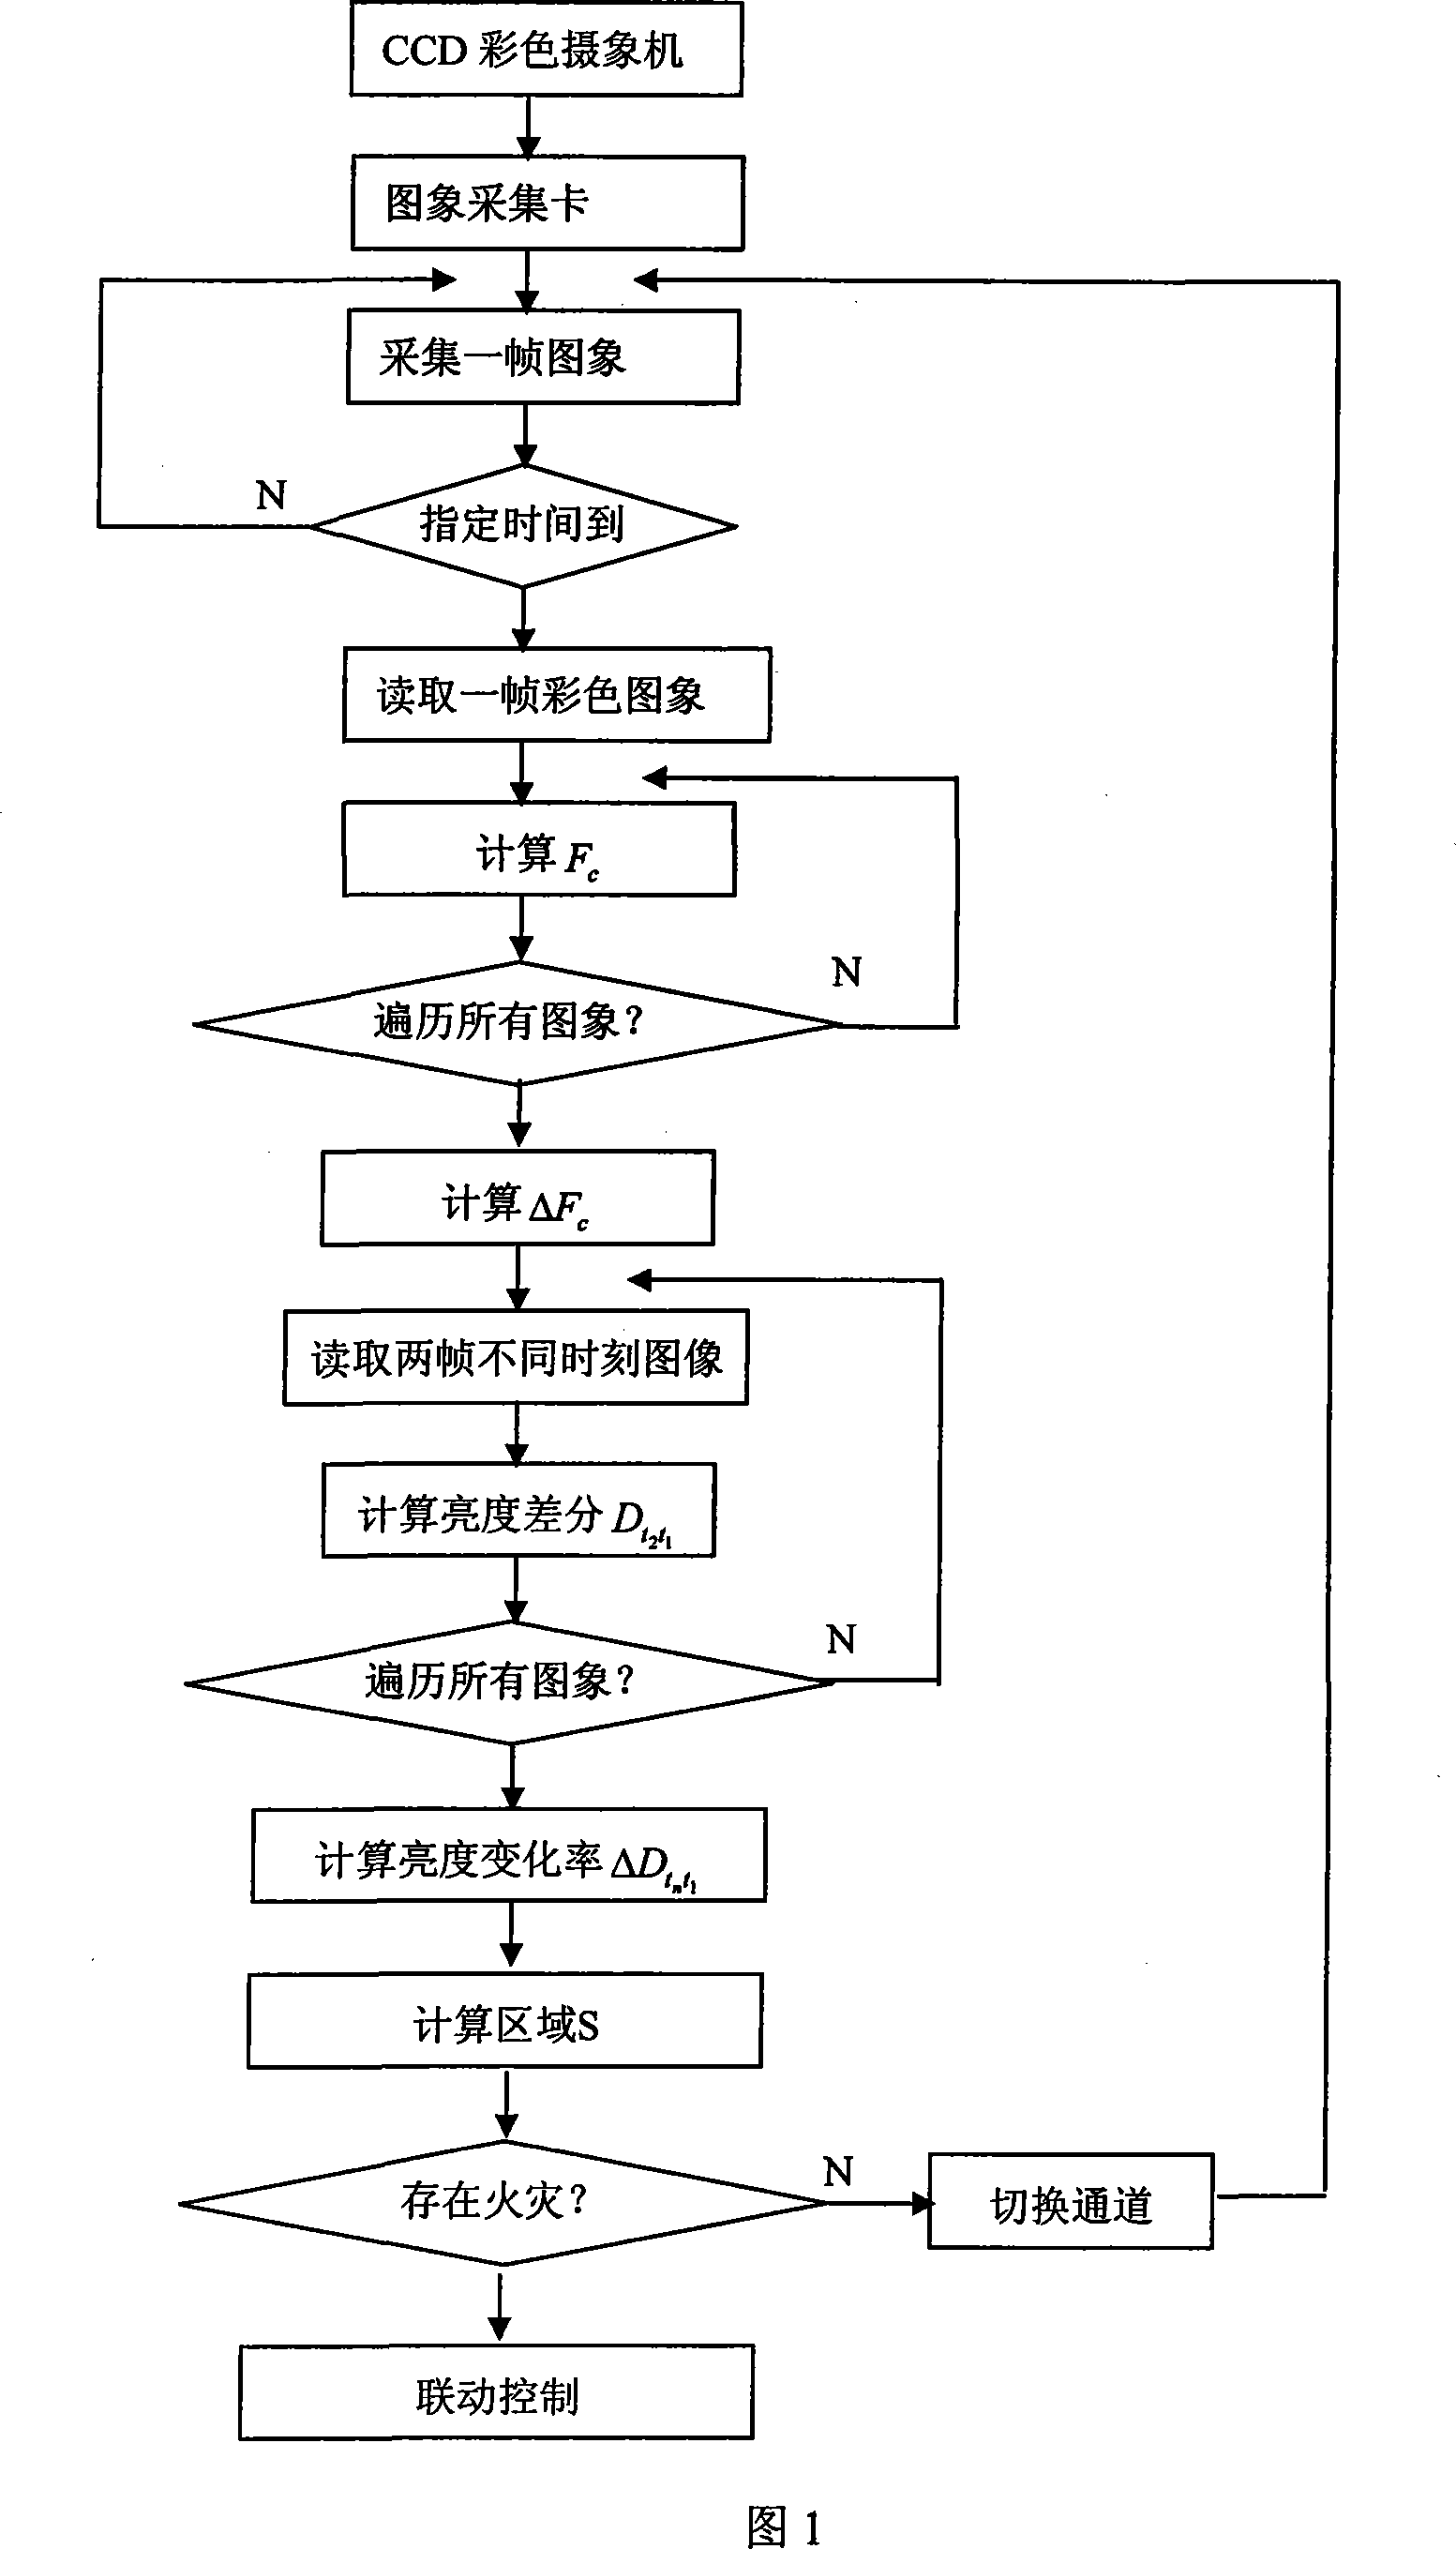 Method for fire detection based on flame color template